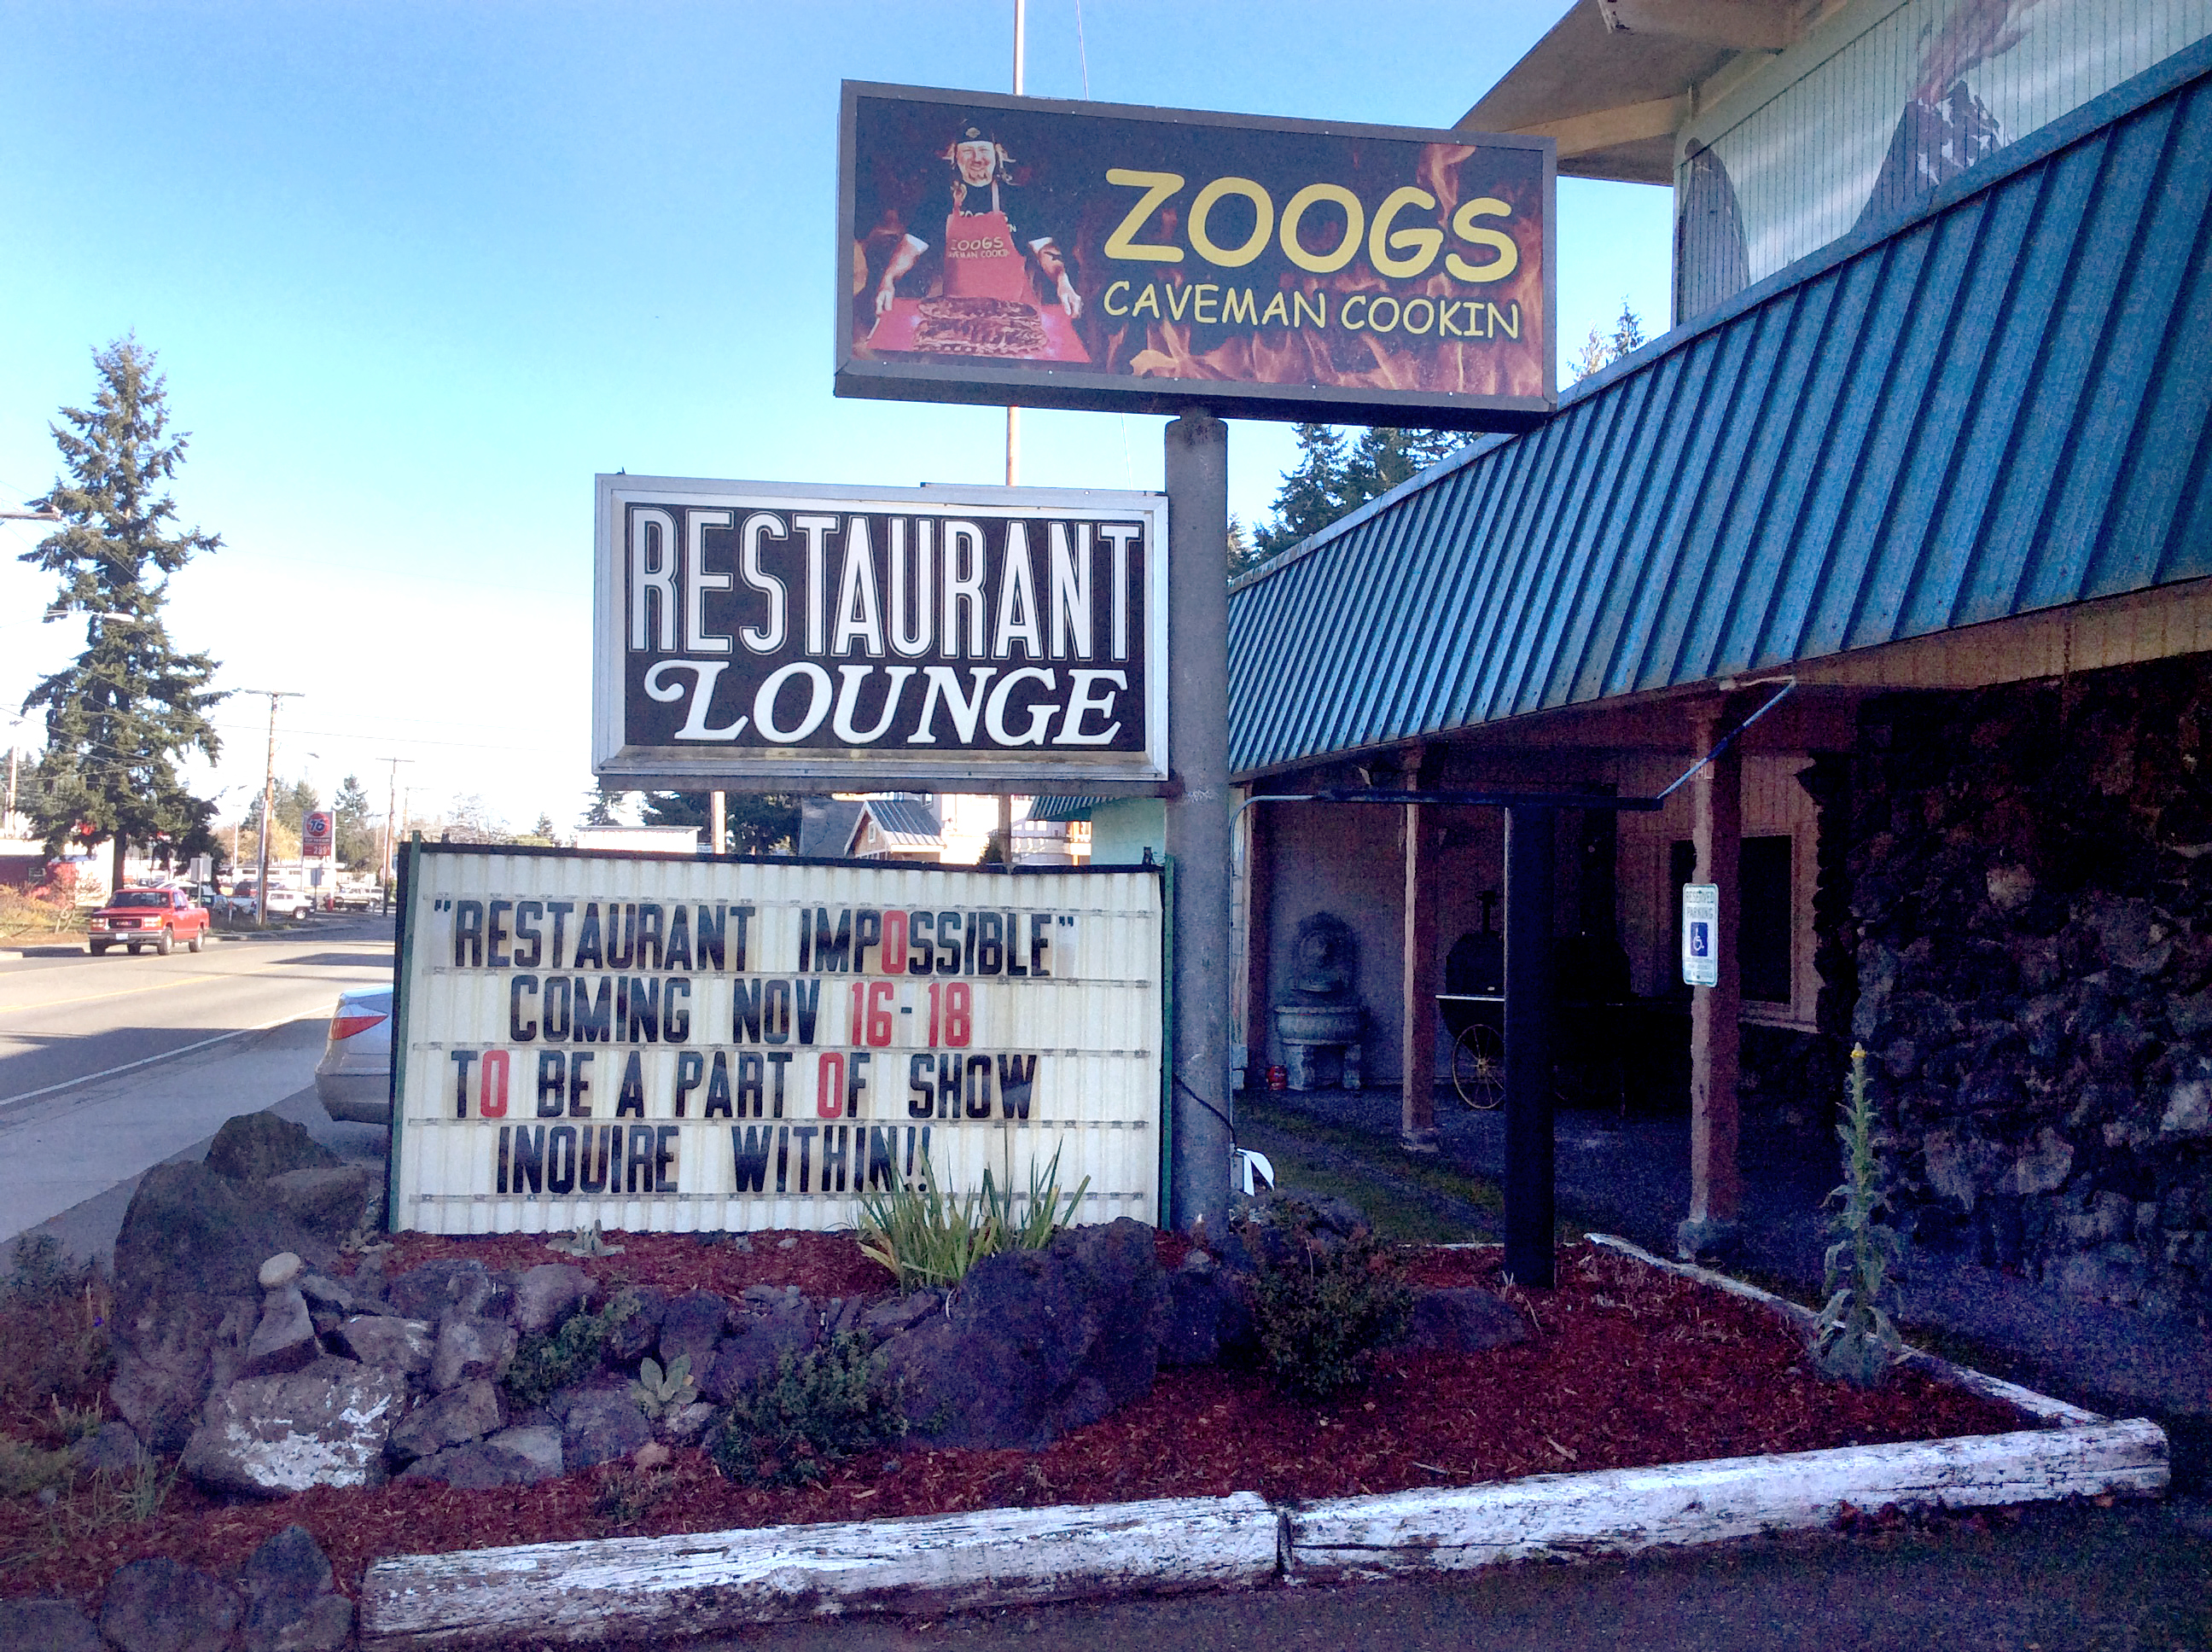 Zoog's Caveman Cookin' in Port Hadlock is set to get a visit from the Food Network's “Restaurant Impossible” show next week. Charlie Bermant/Peninsula Daily News